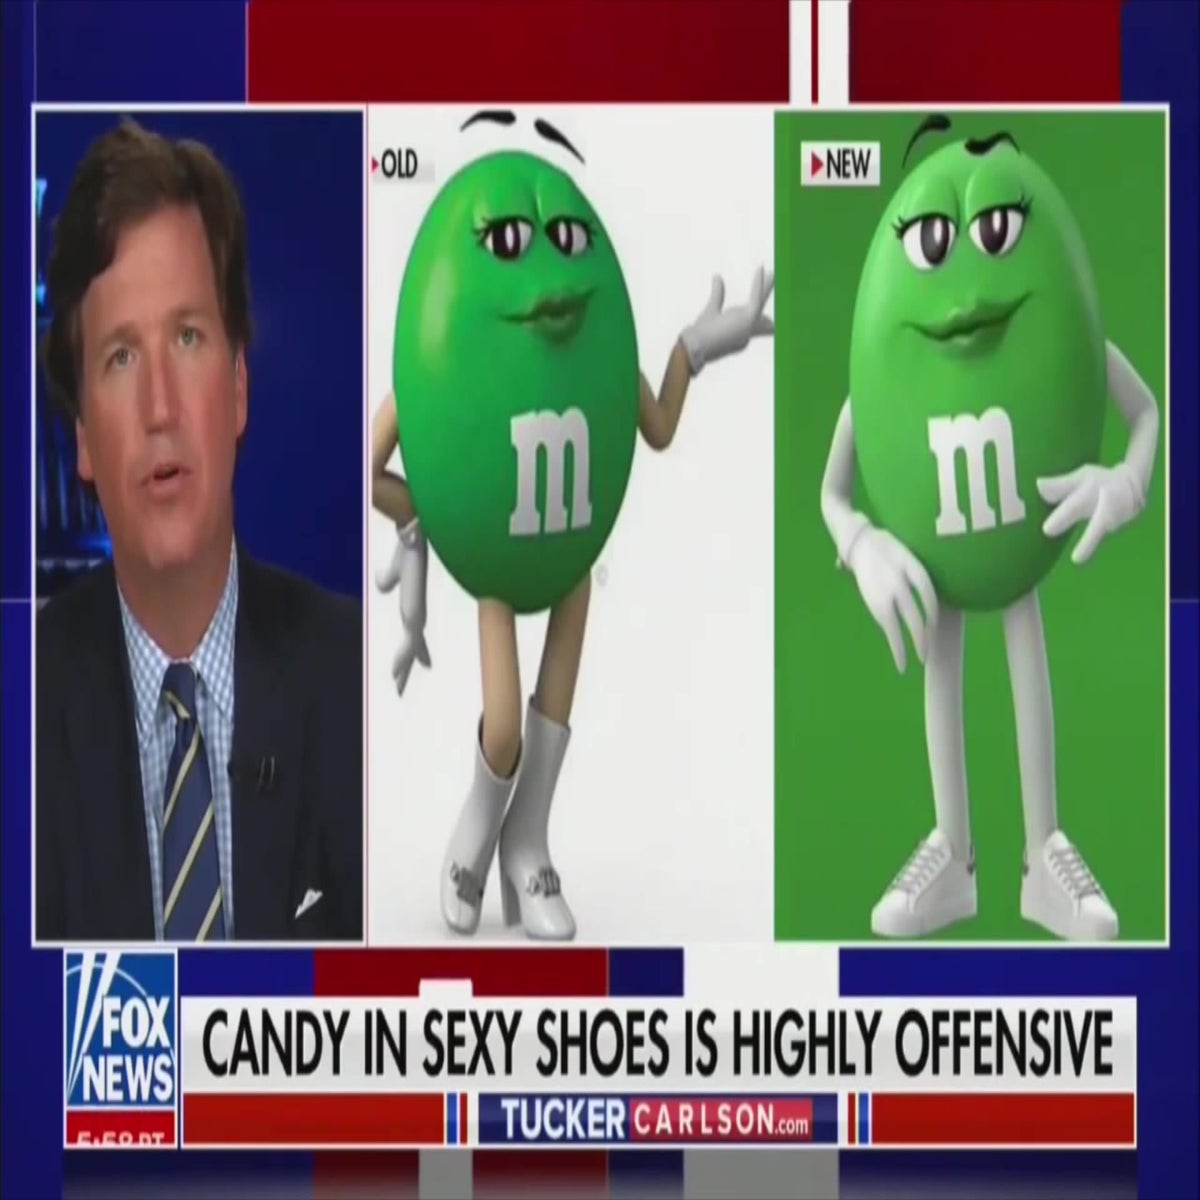 Was the Recent M&M's Announcement Just a Stunt Leading Up to the